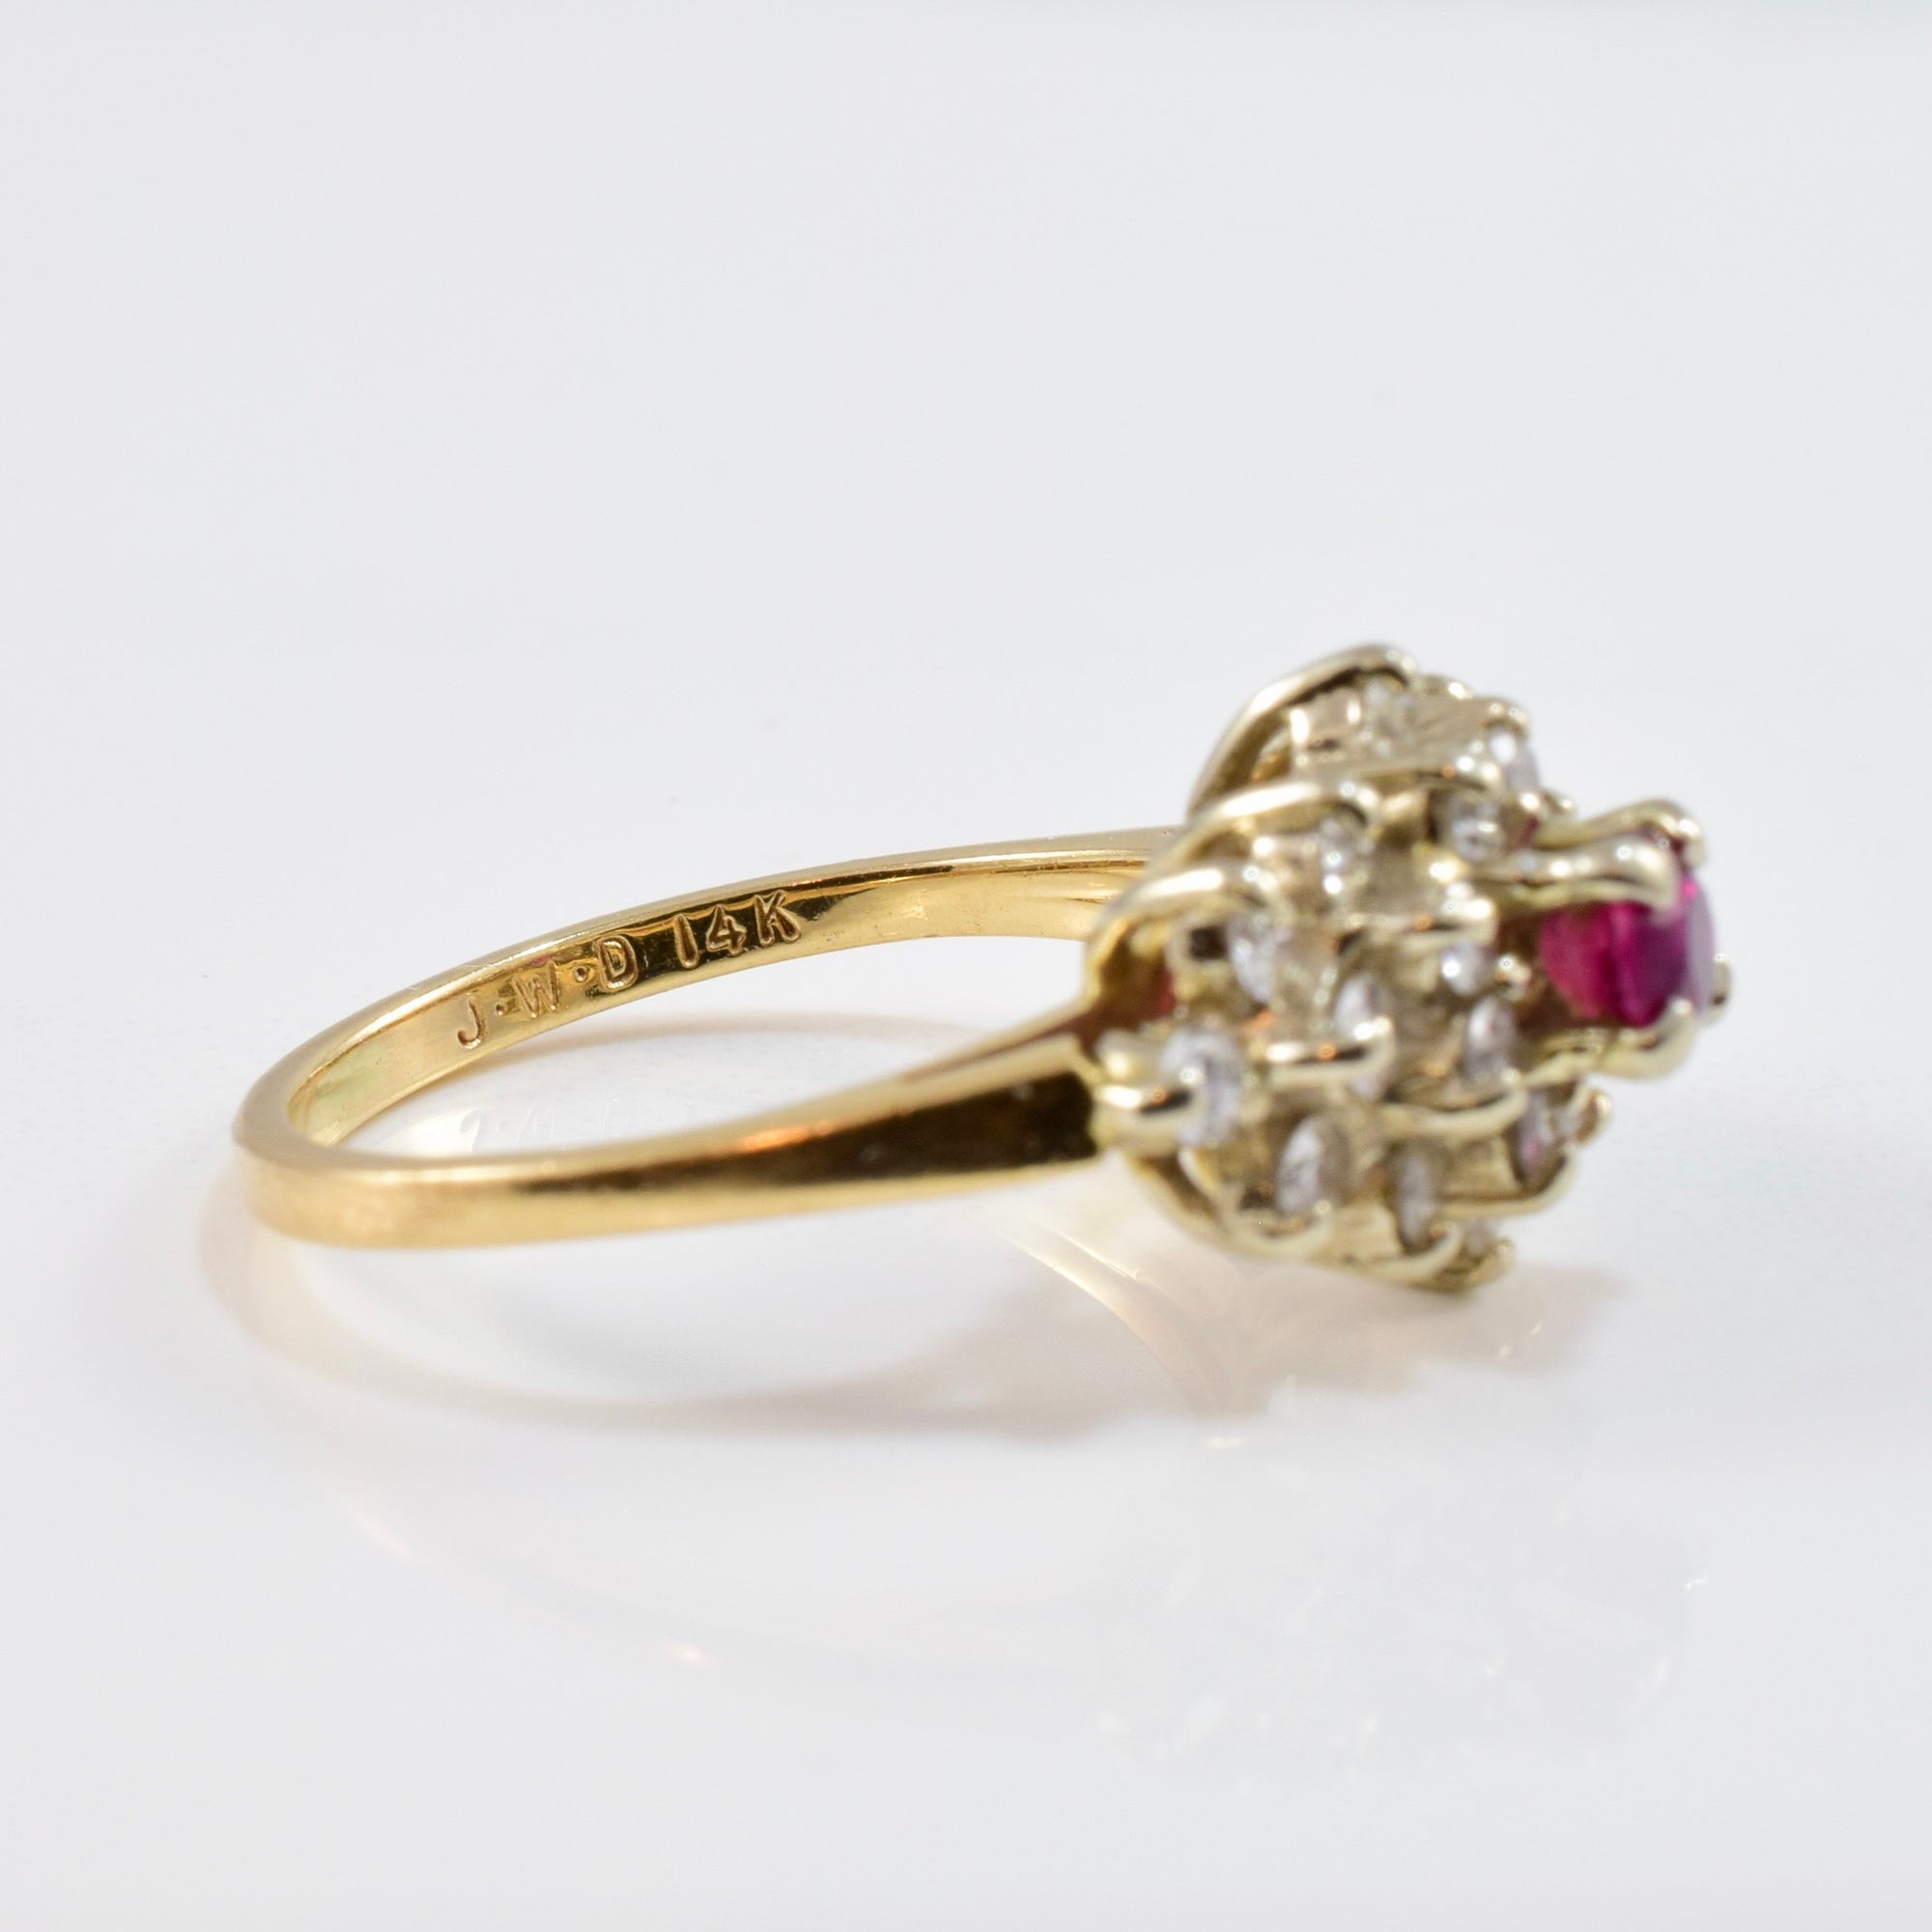 High Set Diamond Cluster and Ruby Ring | 0.55 ctw SZ 4.75 |